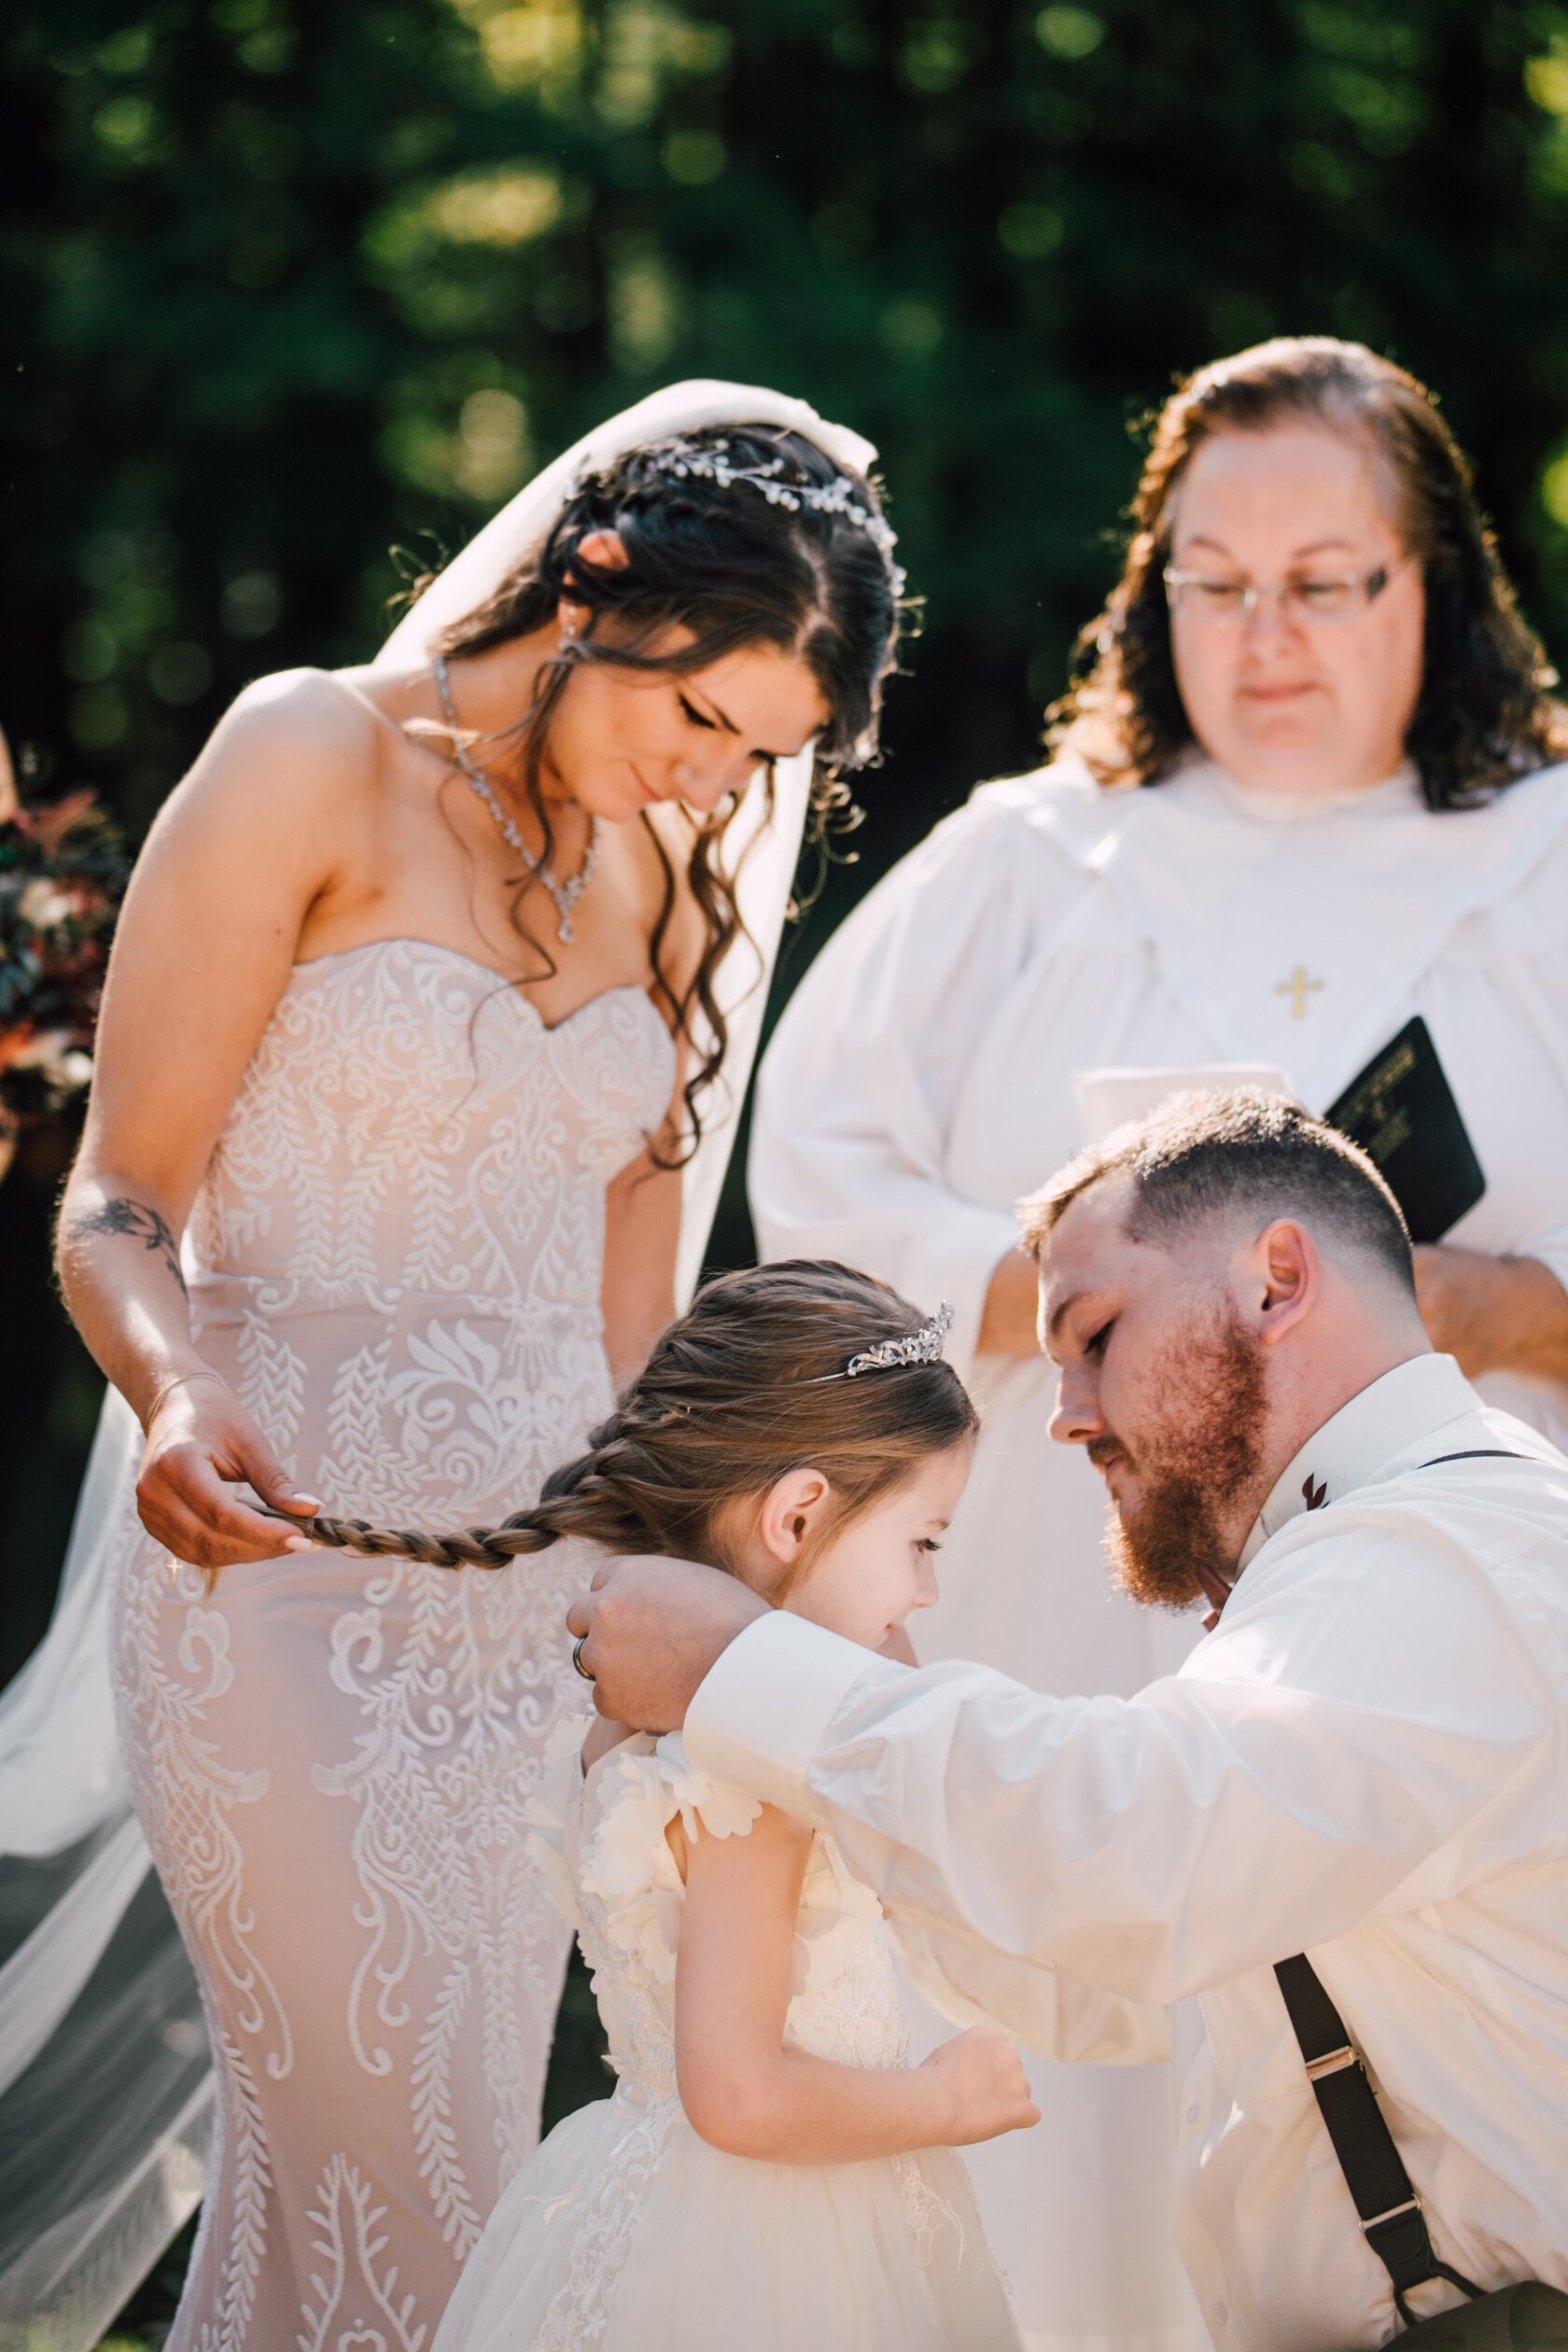  The bride holds her daughter’s hair back as her now husband puts a necklace on her at their backyard wedding   